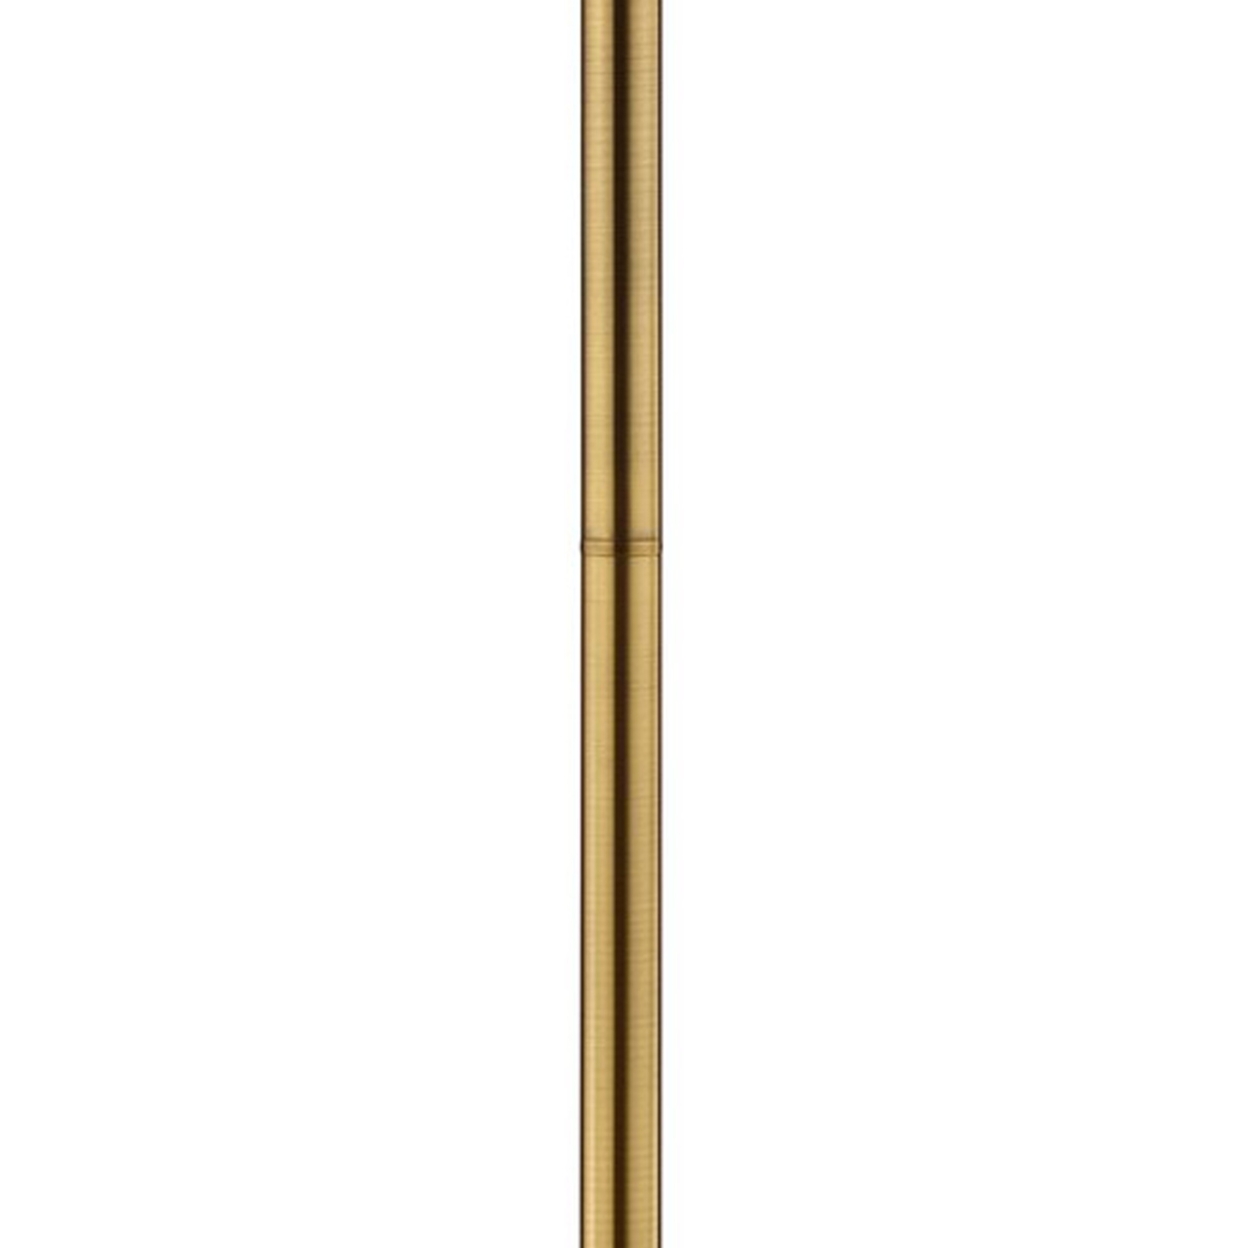 Floor Lamp With Crystal Orb And Metal Stalk Support, Gold- Saltoro Sherpi